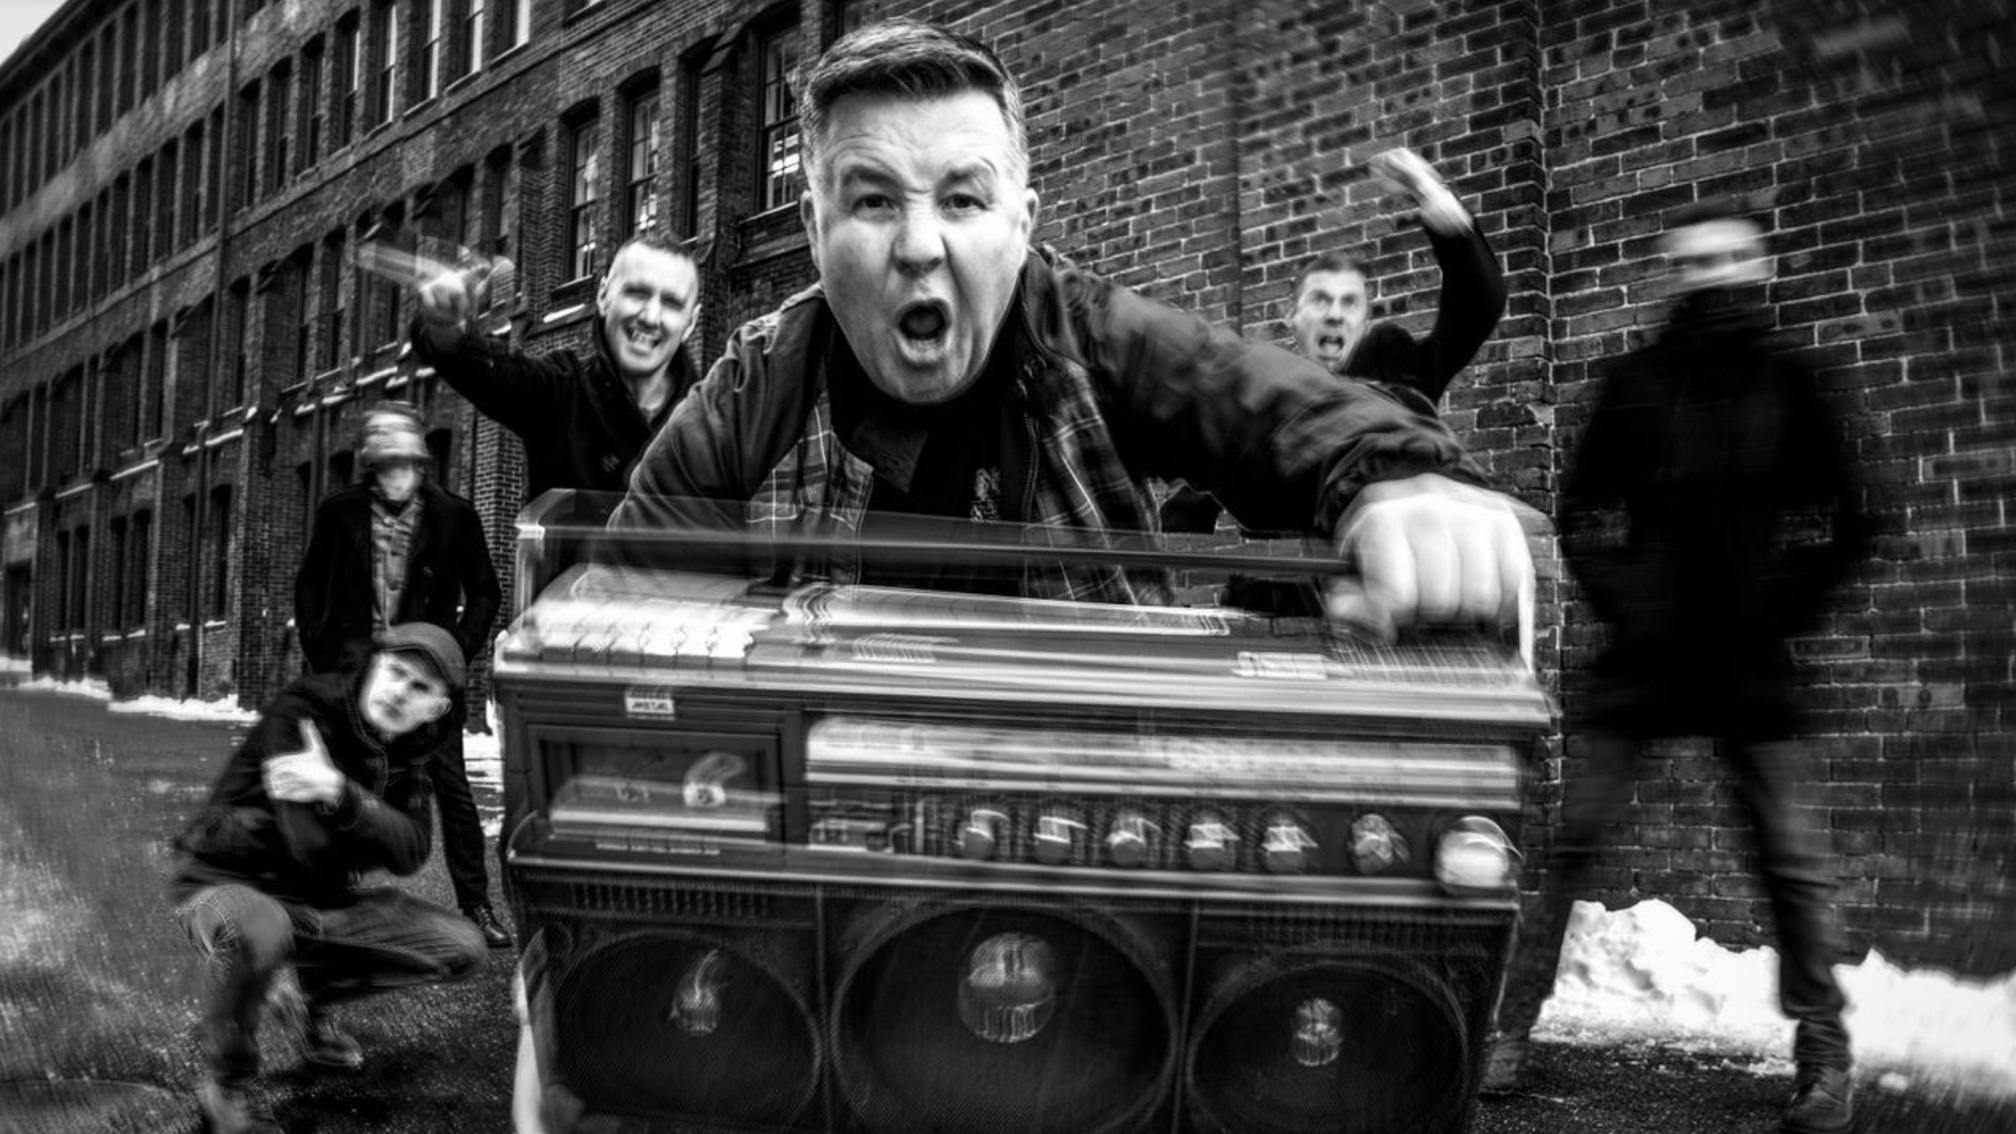 Dropkick Murphys have announced a new album, Turn Up That Dial